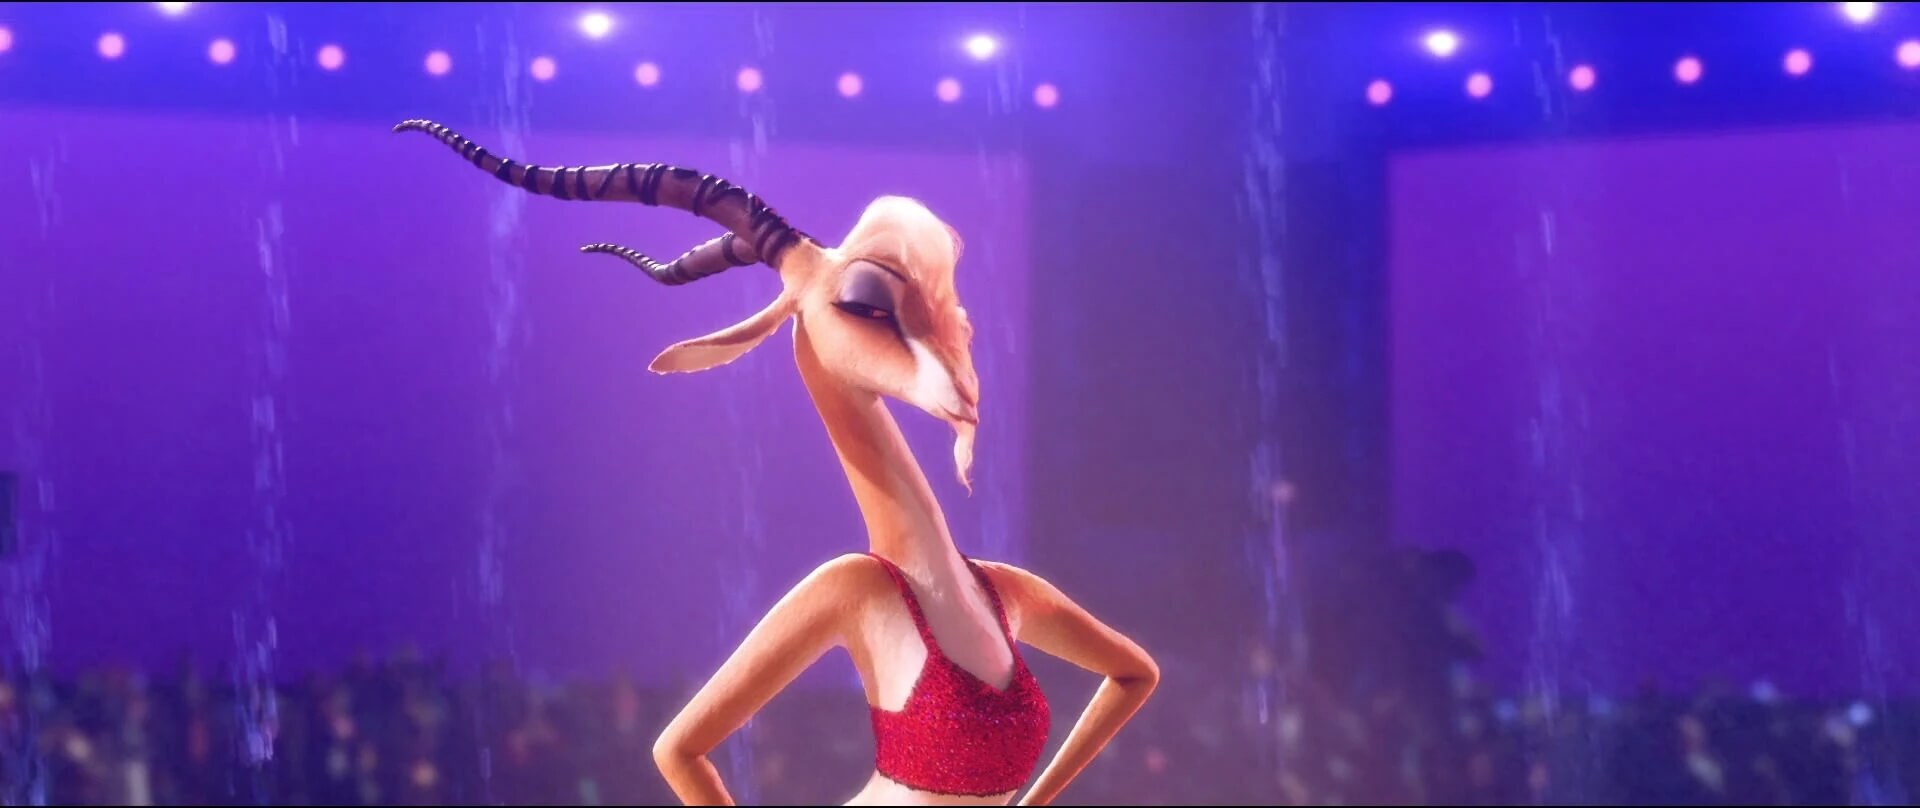 11-facts-about-gazelle-zootopia